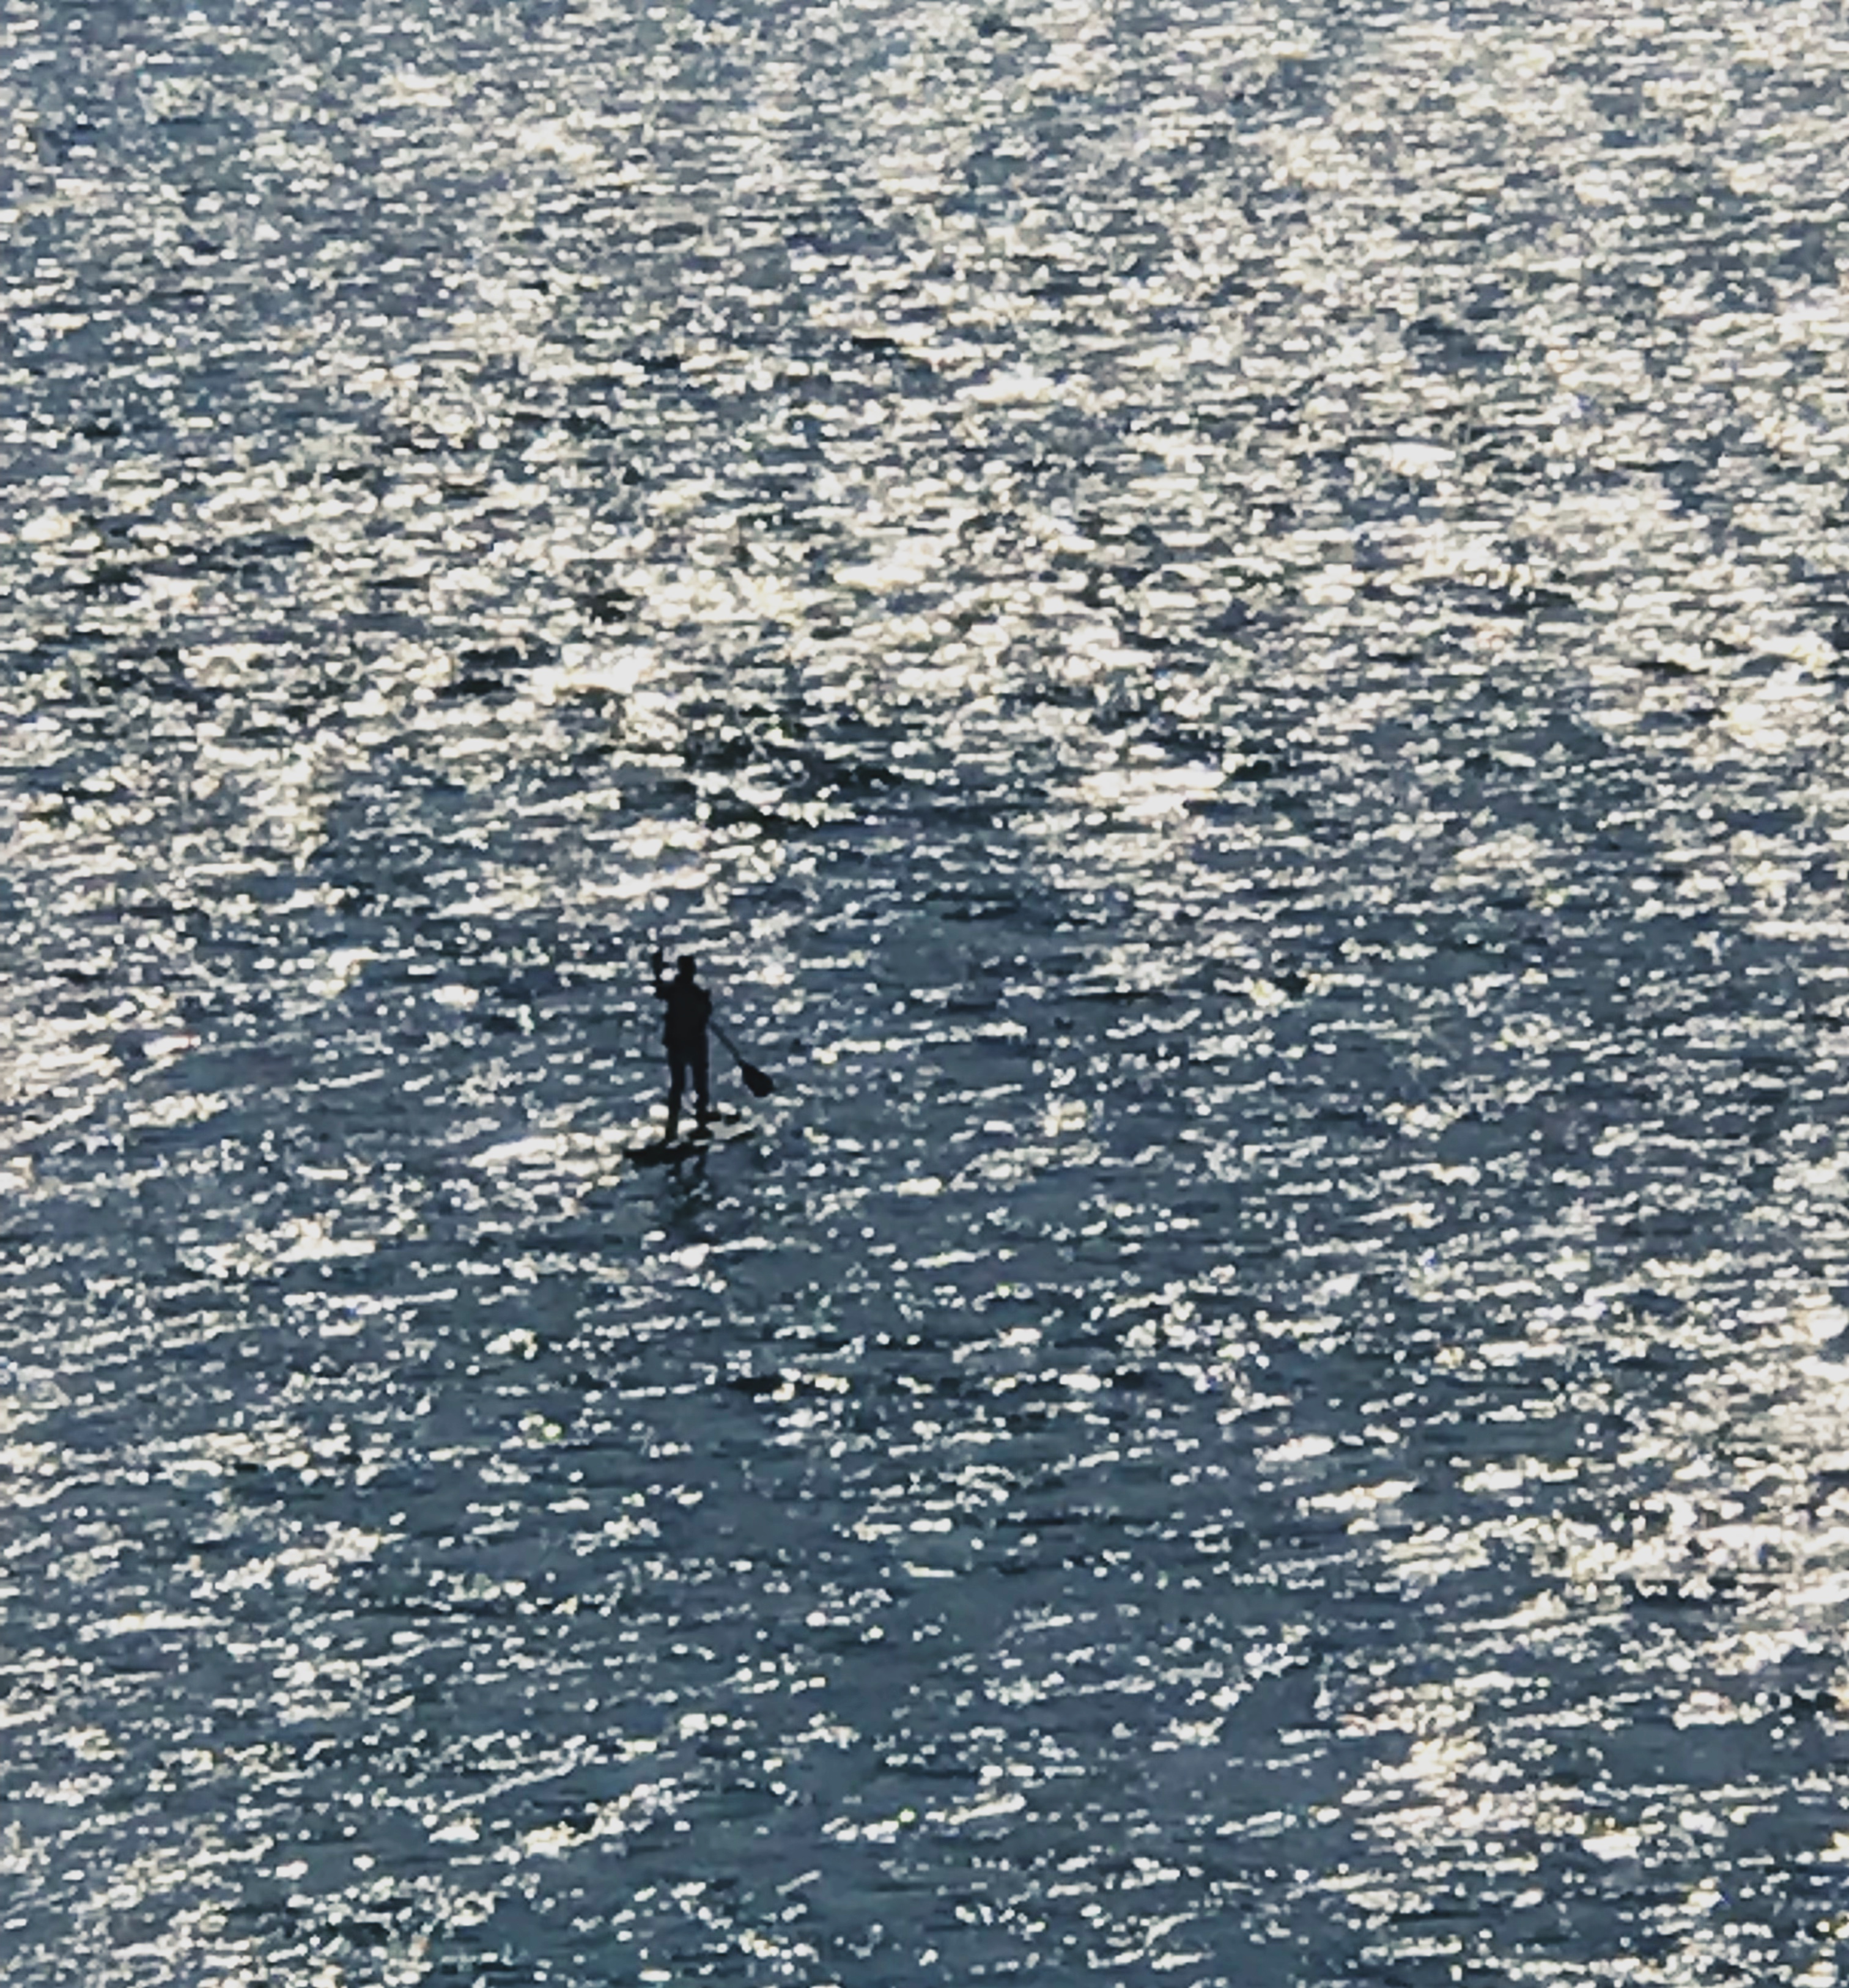 A paddleboarder above a glimmering river.